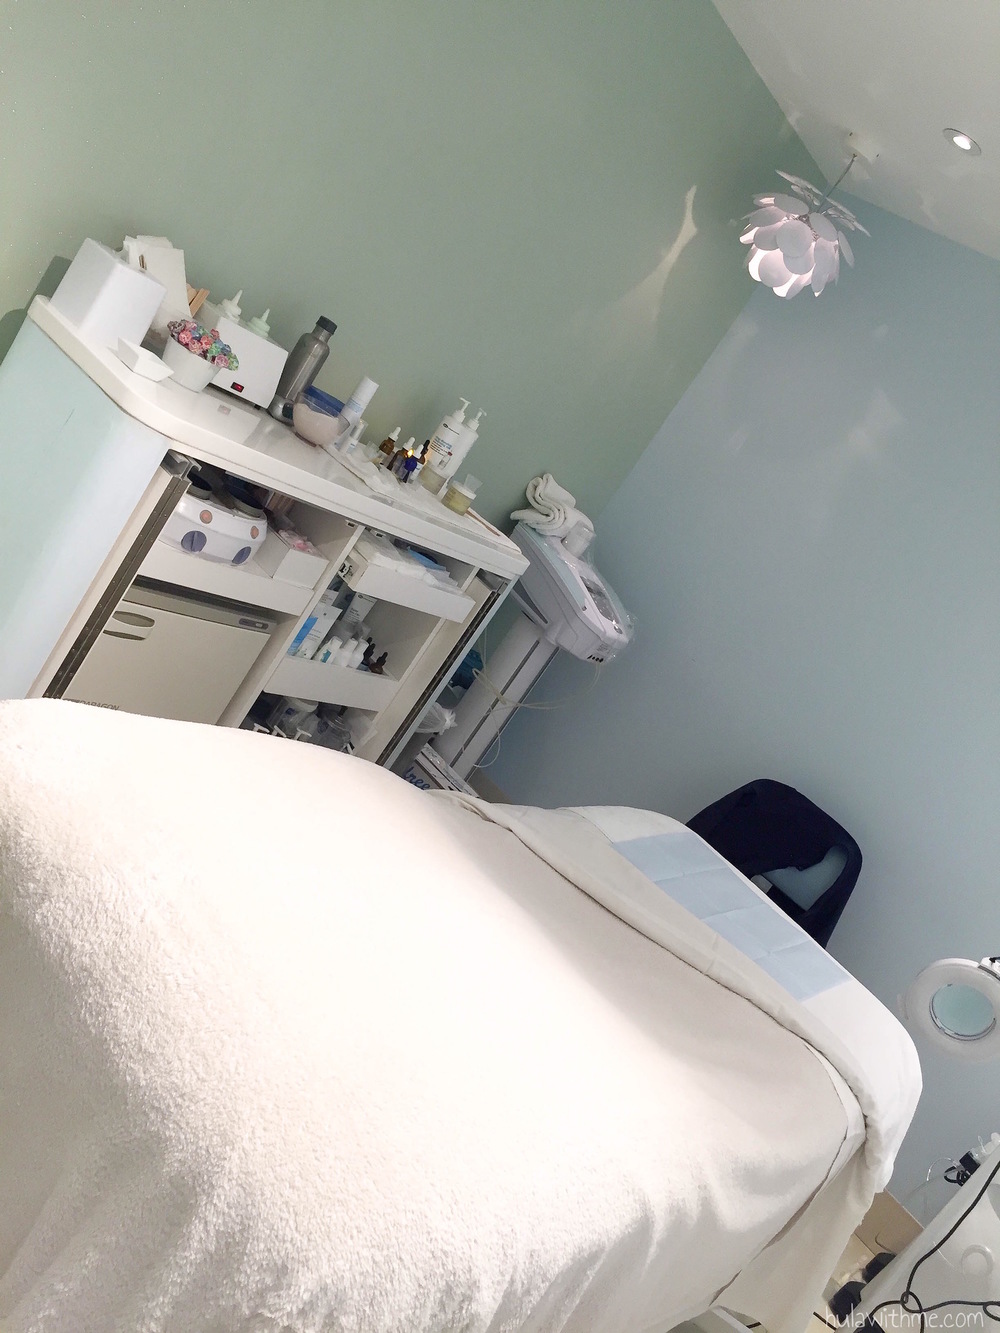 Bliss Spa in Boston, MA: Inside the facial treatment room.